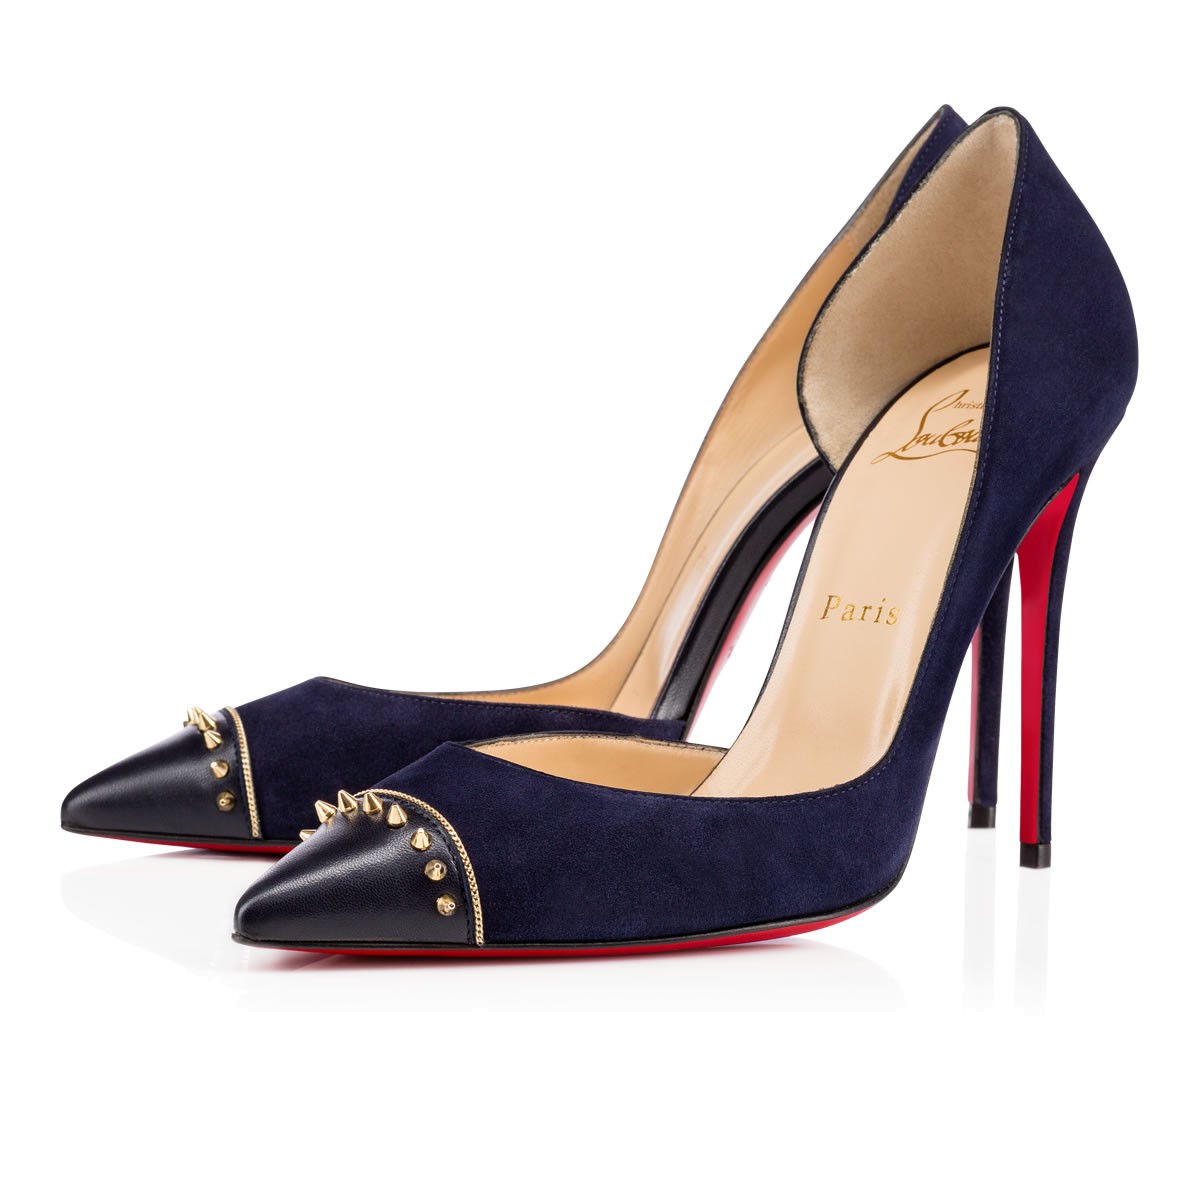 Christian Louboutin Culturella Suede - New Arrivals In Nuit/gold ...